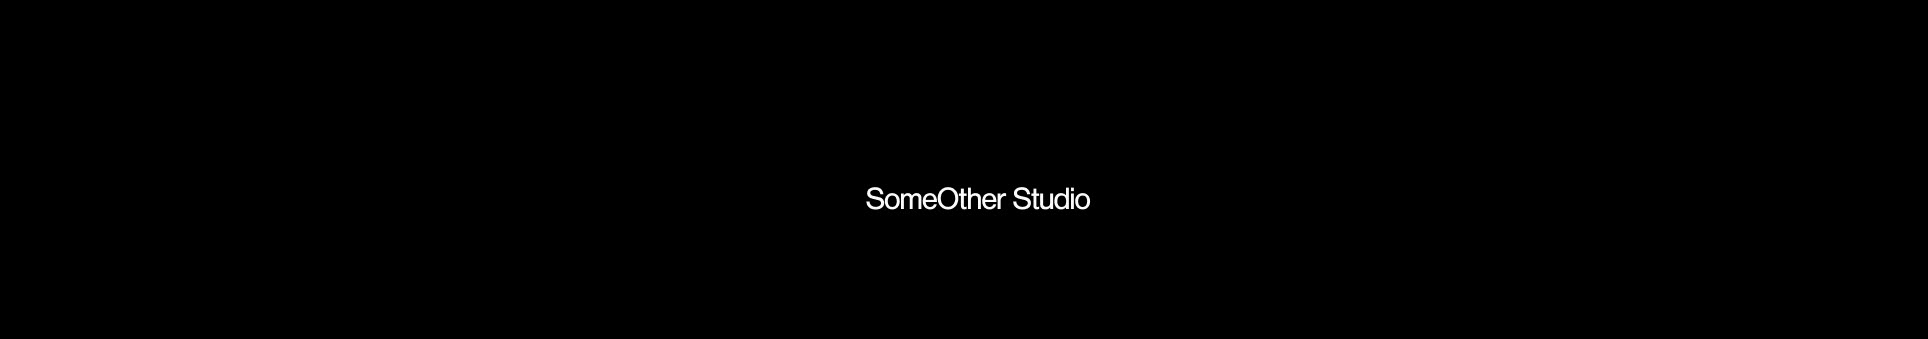 SomeOther Studio's profile banner